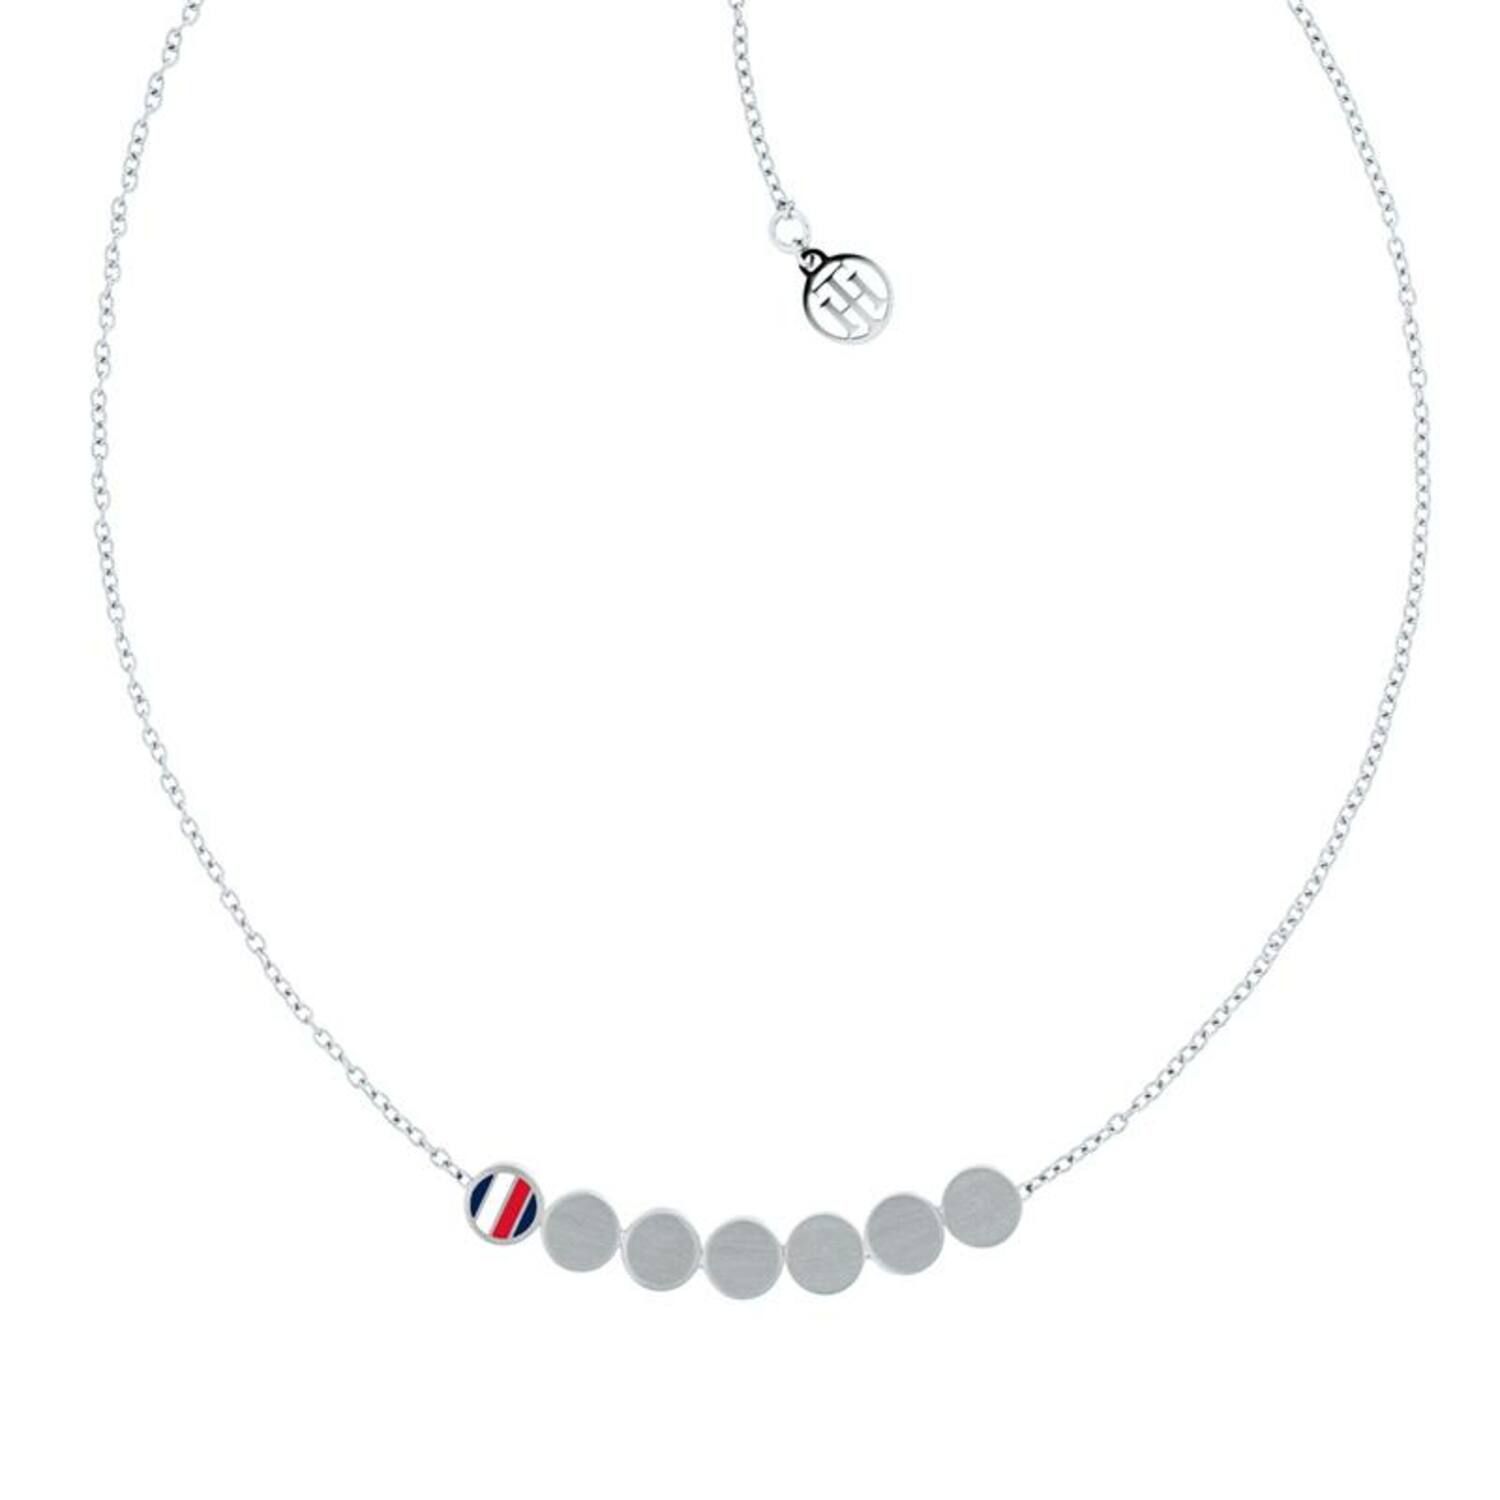  Collier - Staal - 50cm